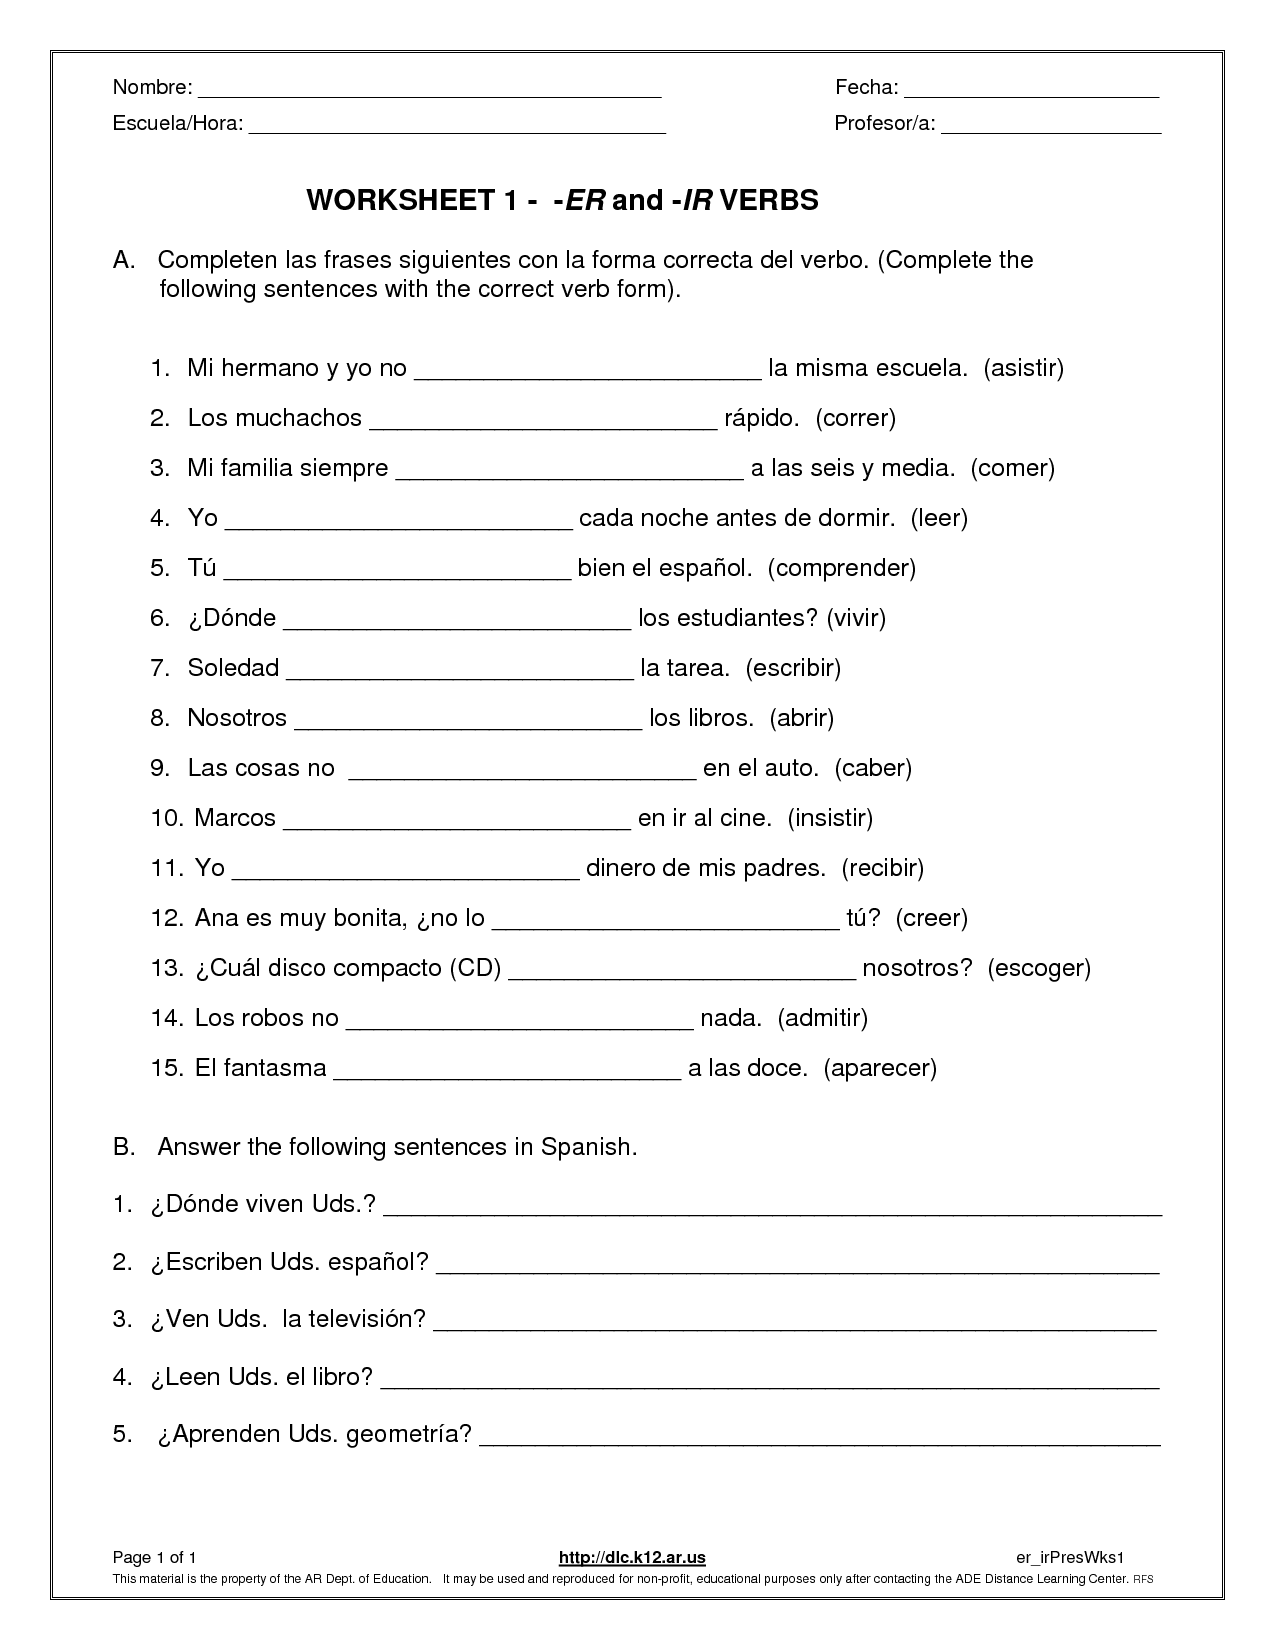 17-best-images-of-a-personal-in-spanish-worksheet-pinterest-spanish-worksheets-subject